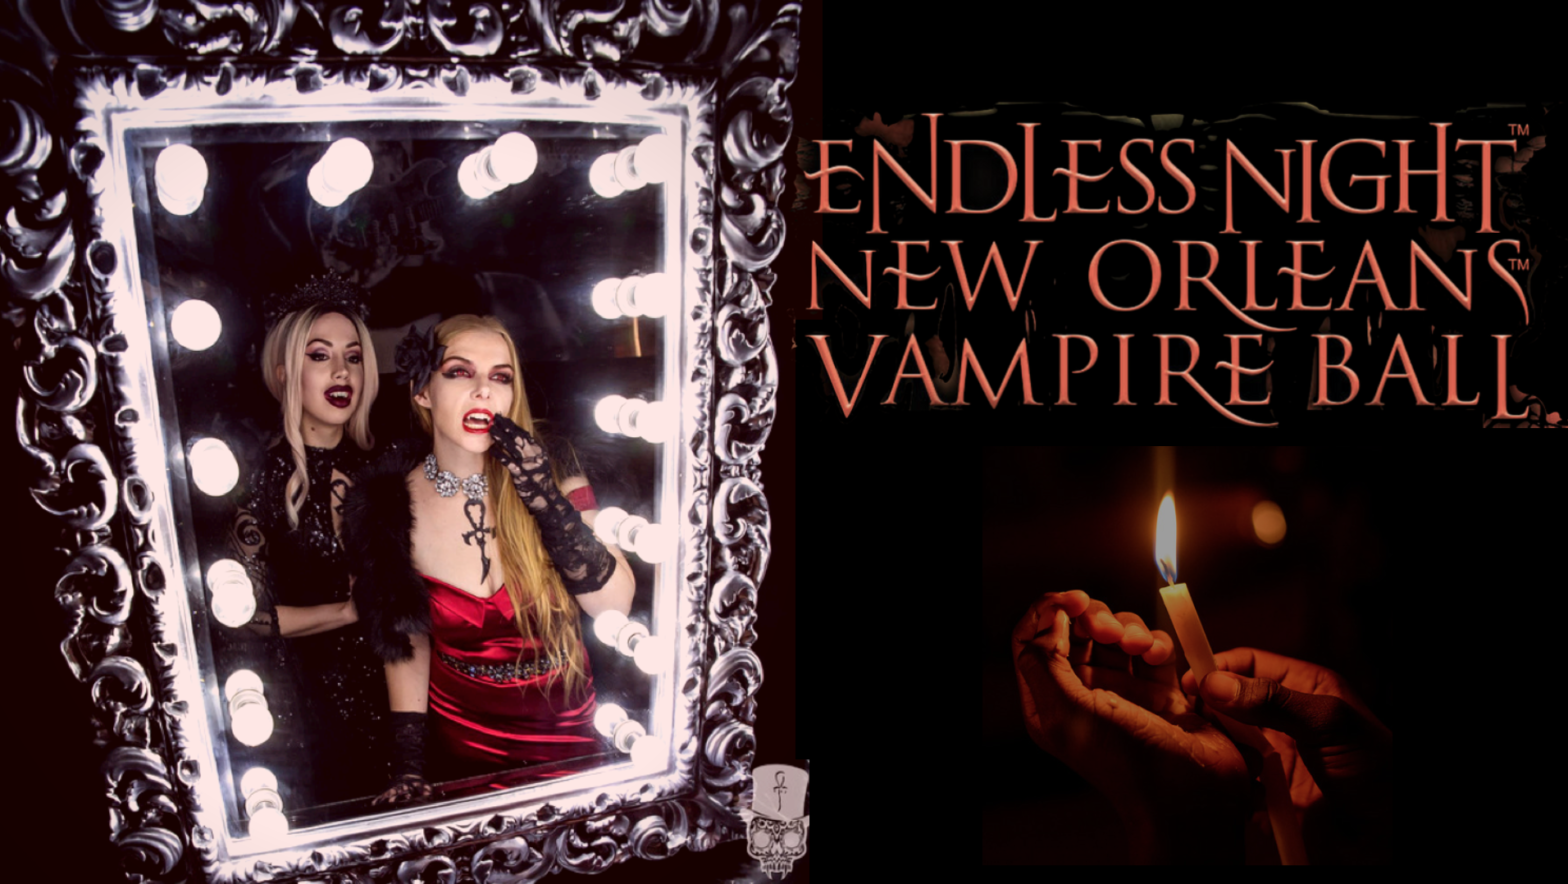 The Endless Night Vampire Ball: the event that every true vampire fan should attend